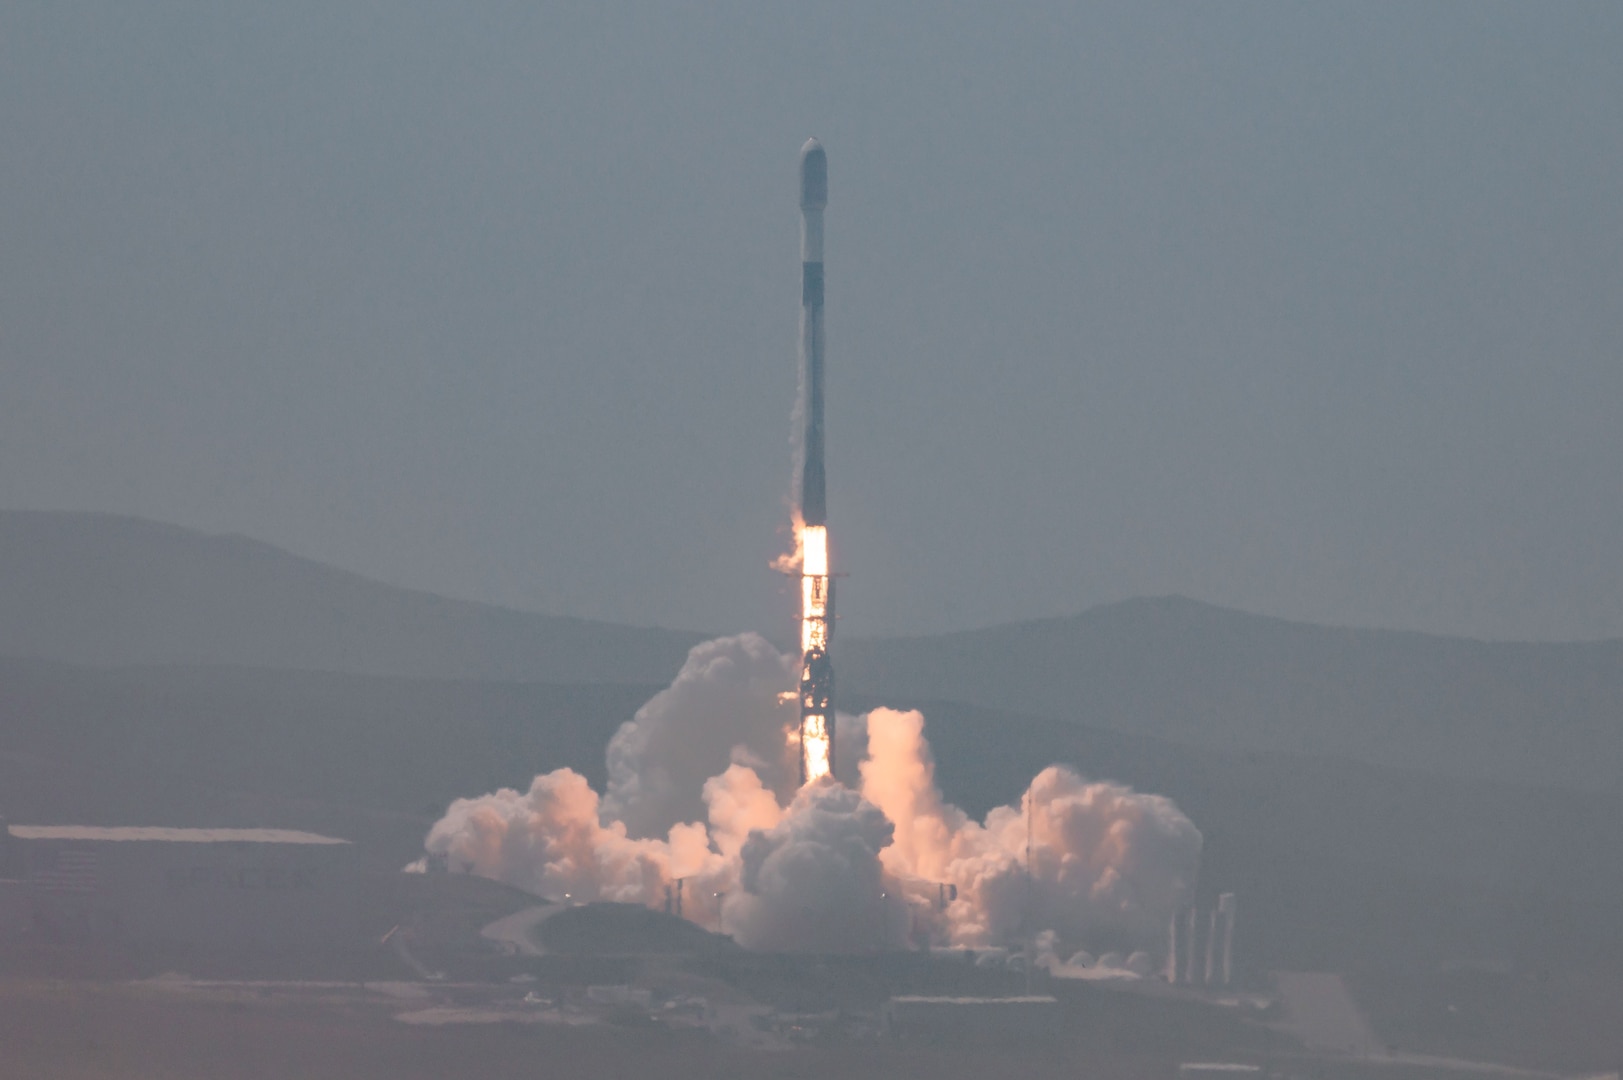 A SpaceX Falcon 9 rocket booster carrying a payload of two WorldView Legion satellites launched from Vandenberg Space Force Base, Calif., May 2, 2024. This launch marked a collaboration between the U.S. Space Forces – Space and Maxar Technologies, a commercial space company. This mission was supported by S4S’s CIC program, which fosters collaboration between the DoD and commercial space companies to deliver critical space capabilities. (U.S. Space Force photo by SrA. Joshua Leroi)